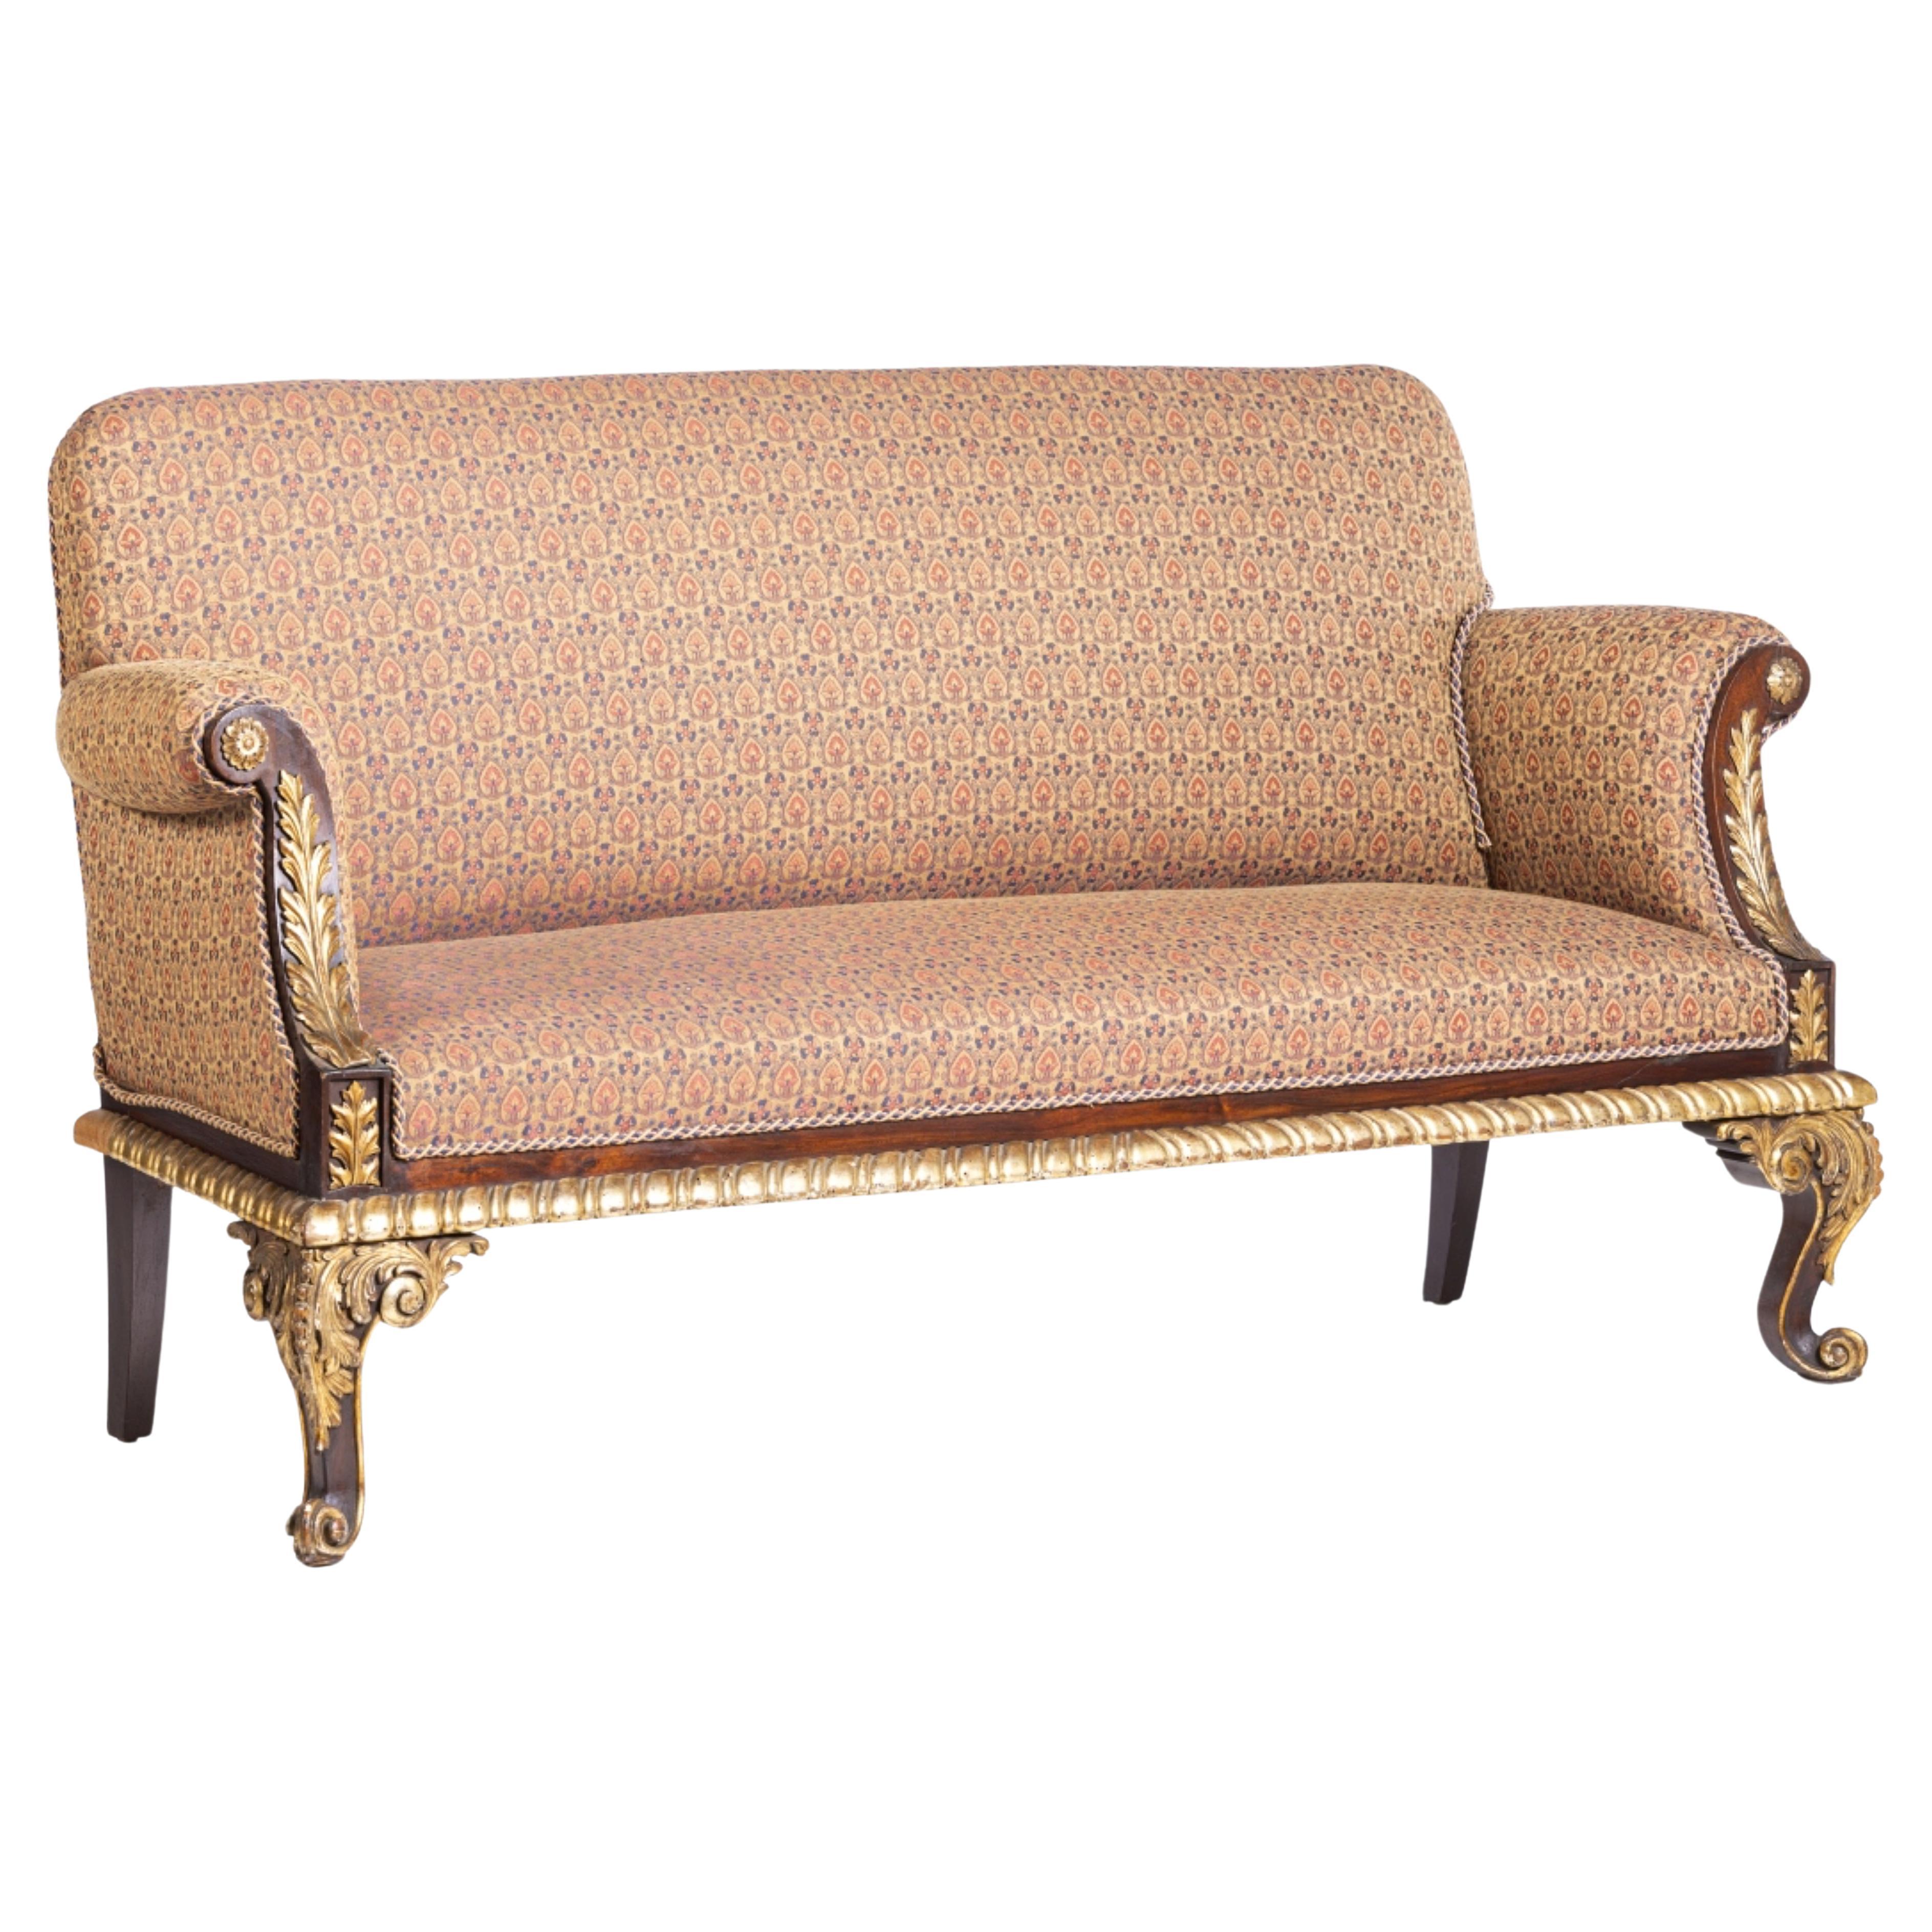 BEAUTIFUL CANAPÉ LOUIS XVI STYLE 19th Century For Sale